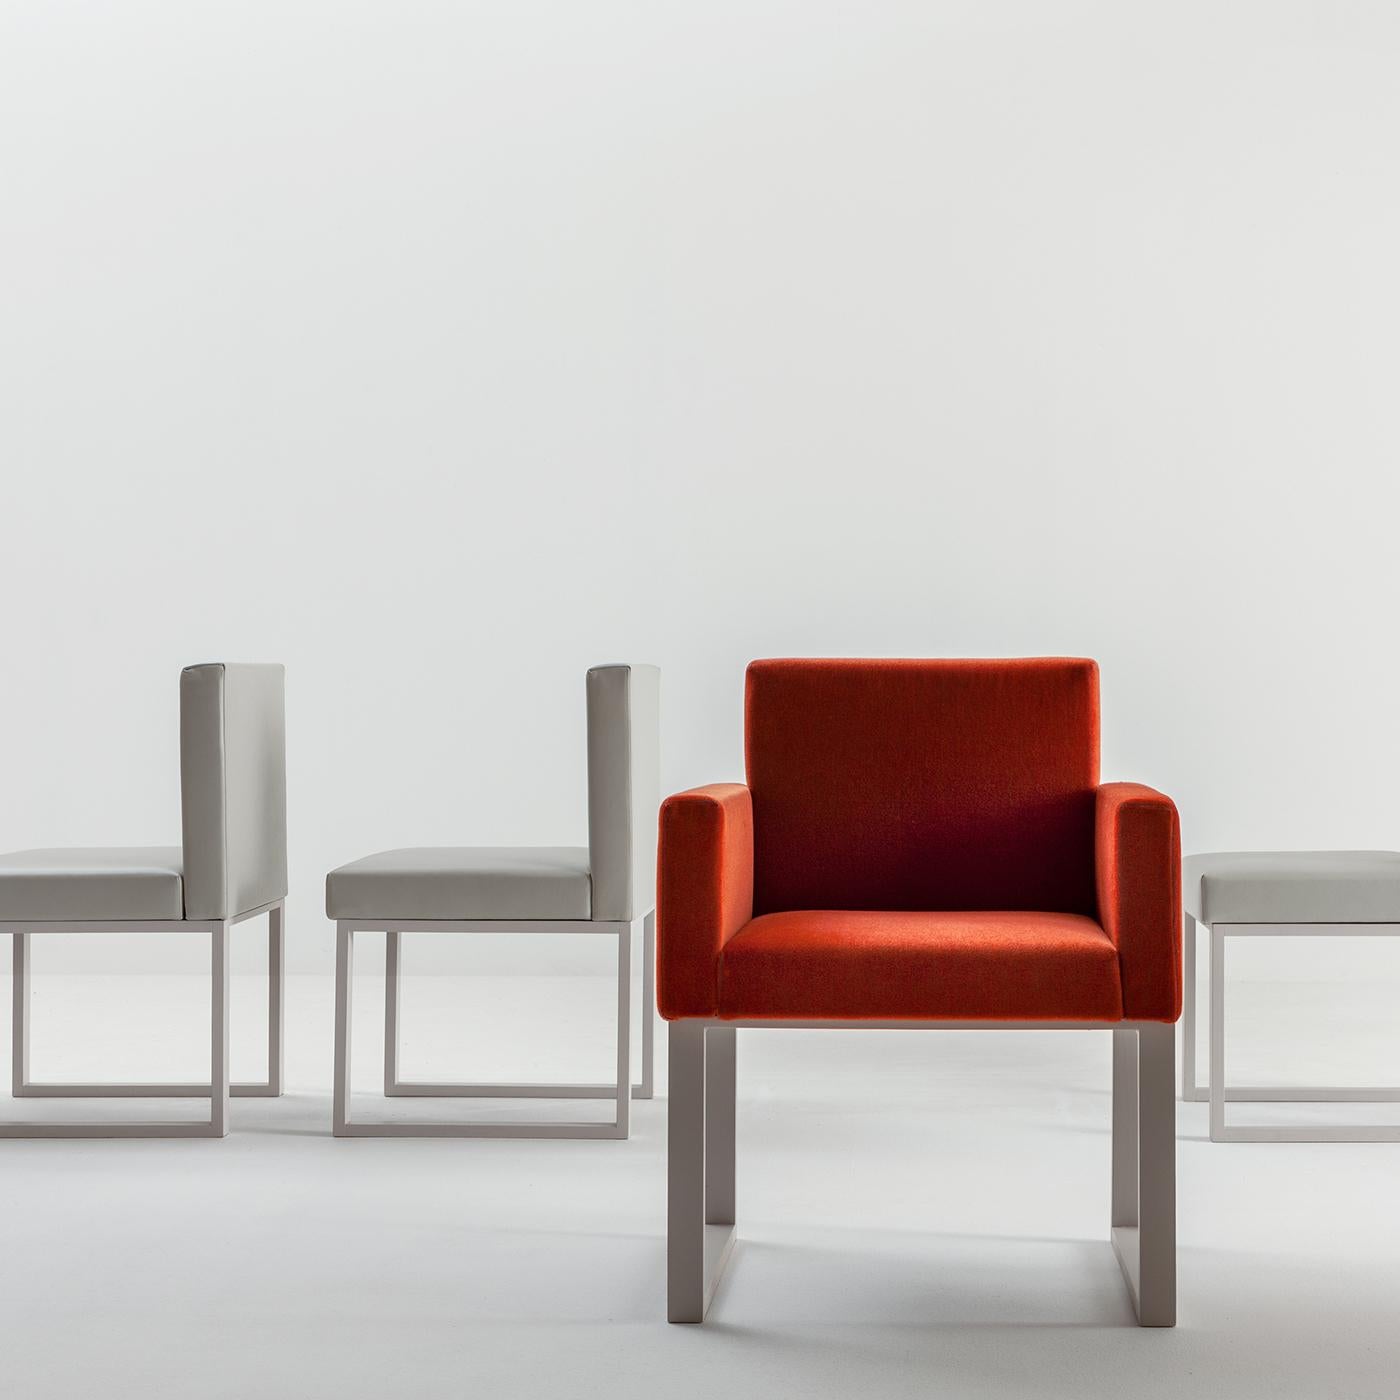 Ultra comfortable and with beautifully simple lines, the Maxima Chair by Bartoli Design is crafted in wood and upholstered in high quality fabric or leather. The legs can be requested in an array of wood tones or lacquered in any color of the RAL